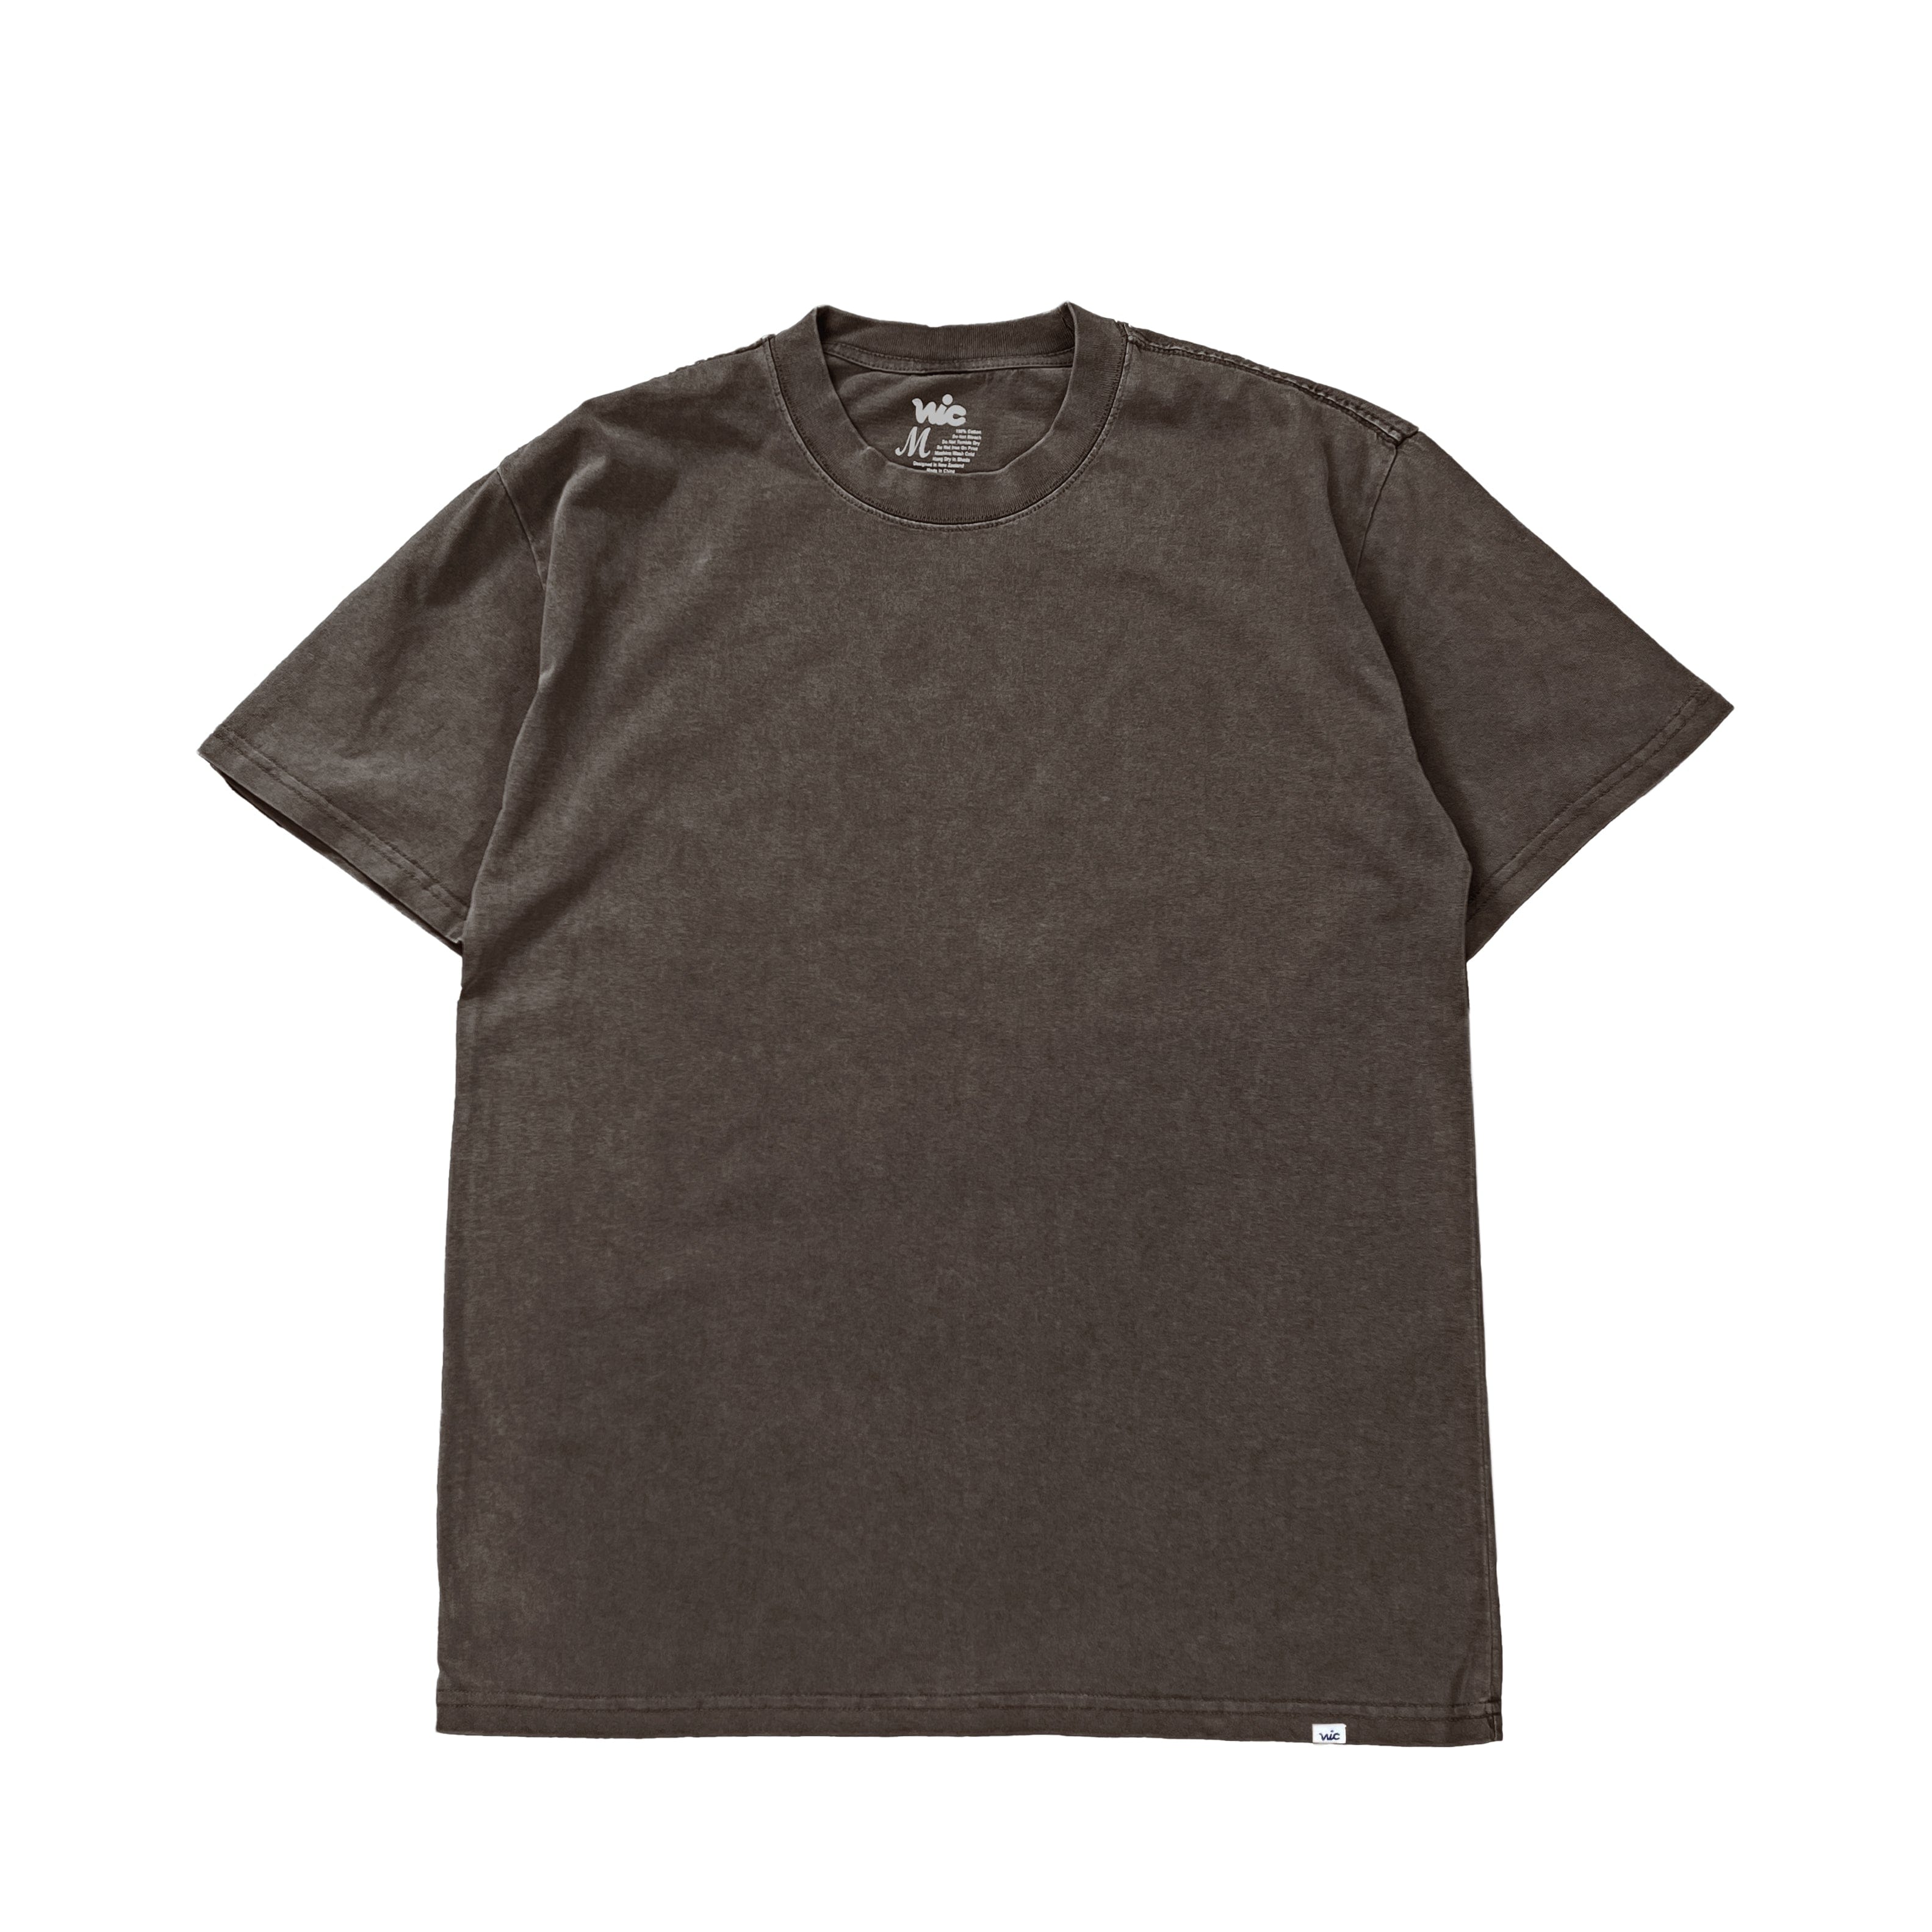 inspired by the oversized warm-up sweaters and T-Shirts from the 90s, The Box Fit Tee is an essential the offers a wider, baggier fit, and cut from 100% smooth cotton jersey for that premium quality feel. As this silhouette is very oversized and loose-fitting, we recommend sizing down to achieve the perfect Box Fit style. Faded Brown, garment dyed.